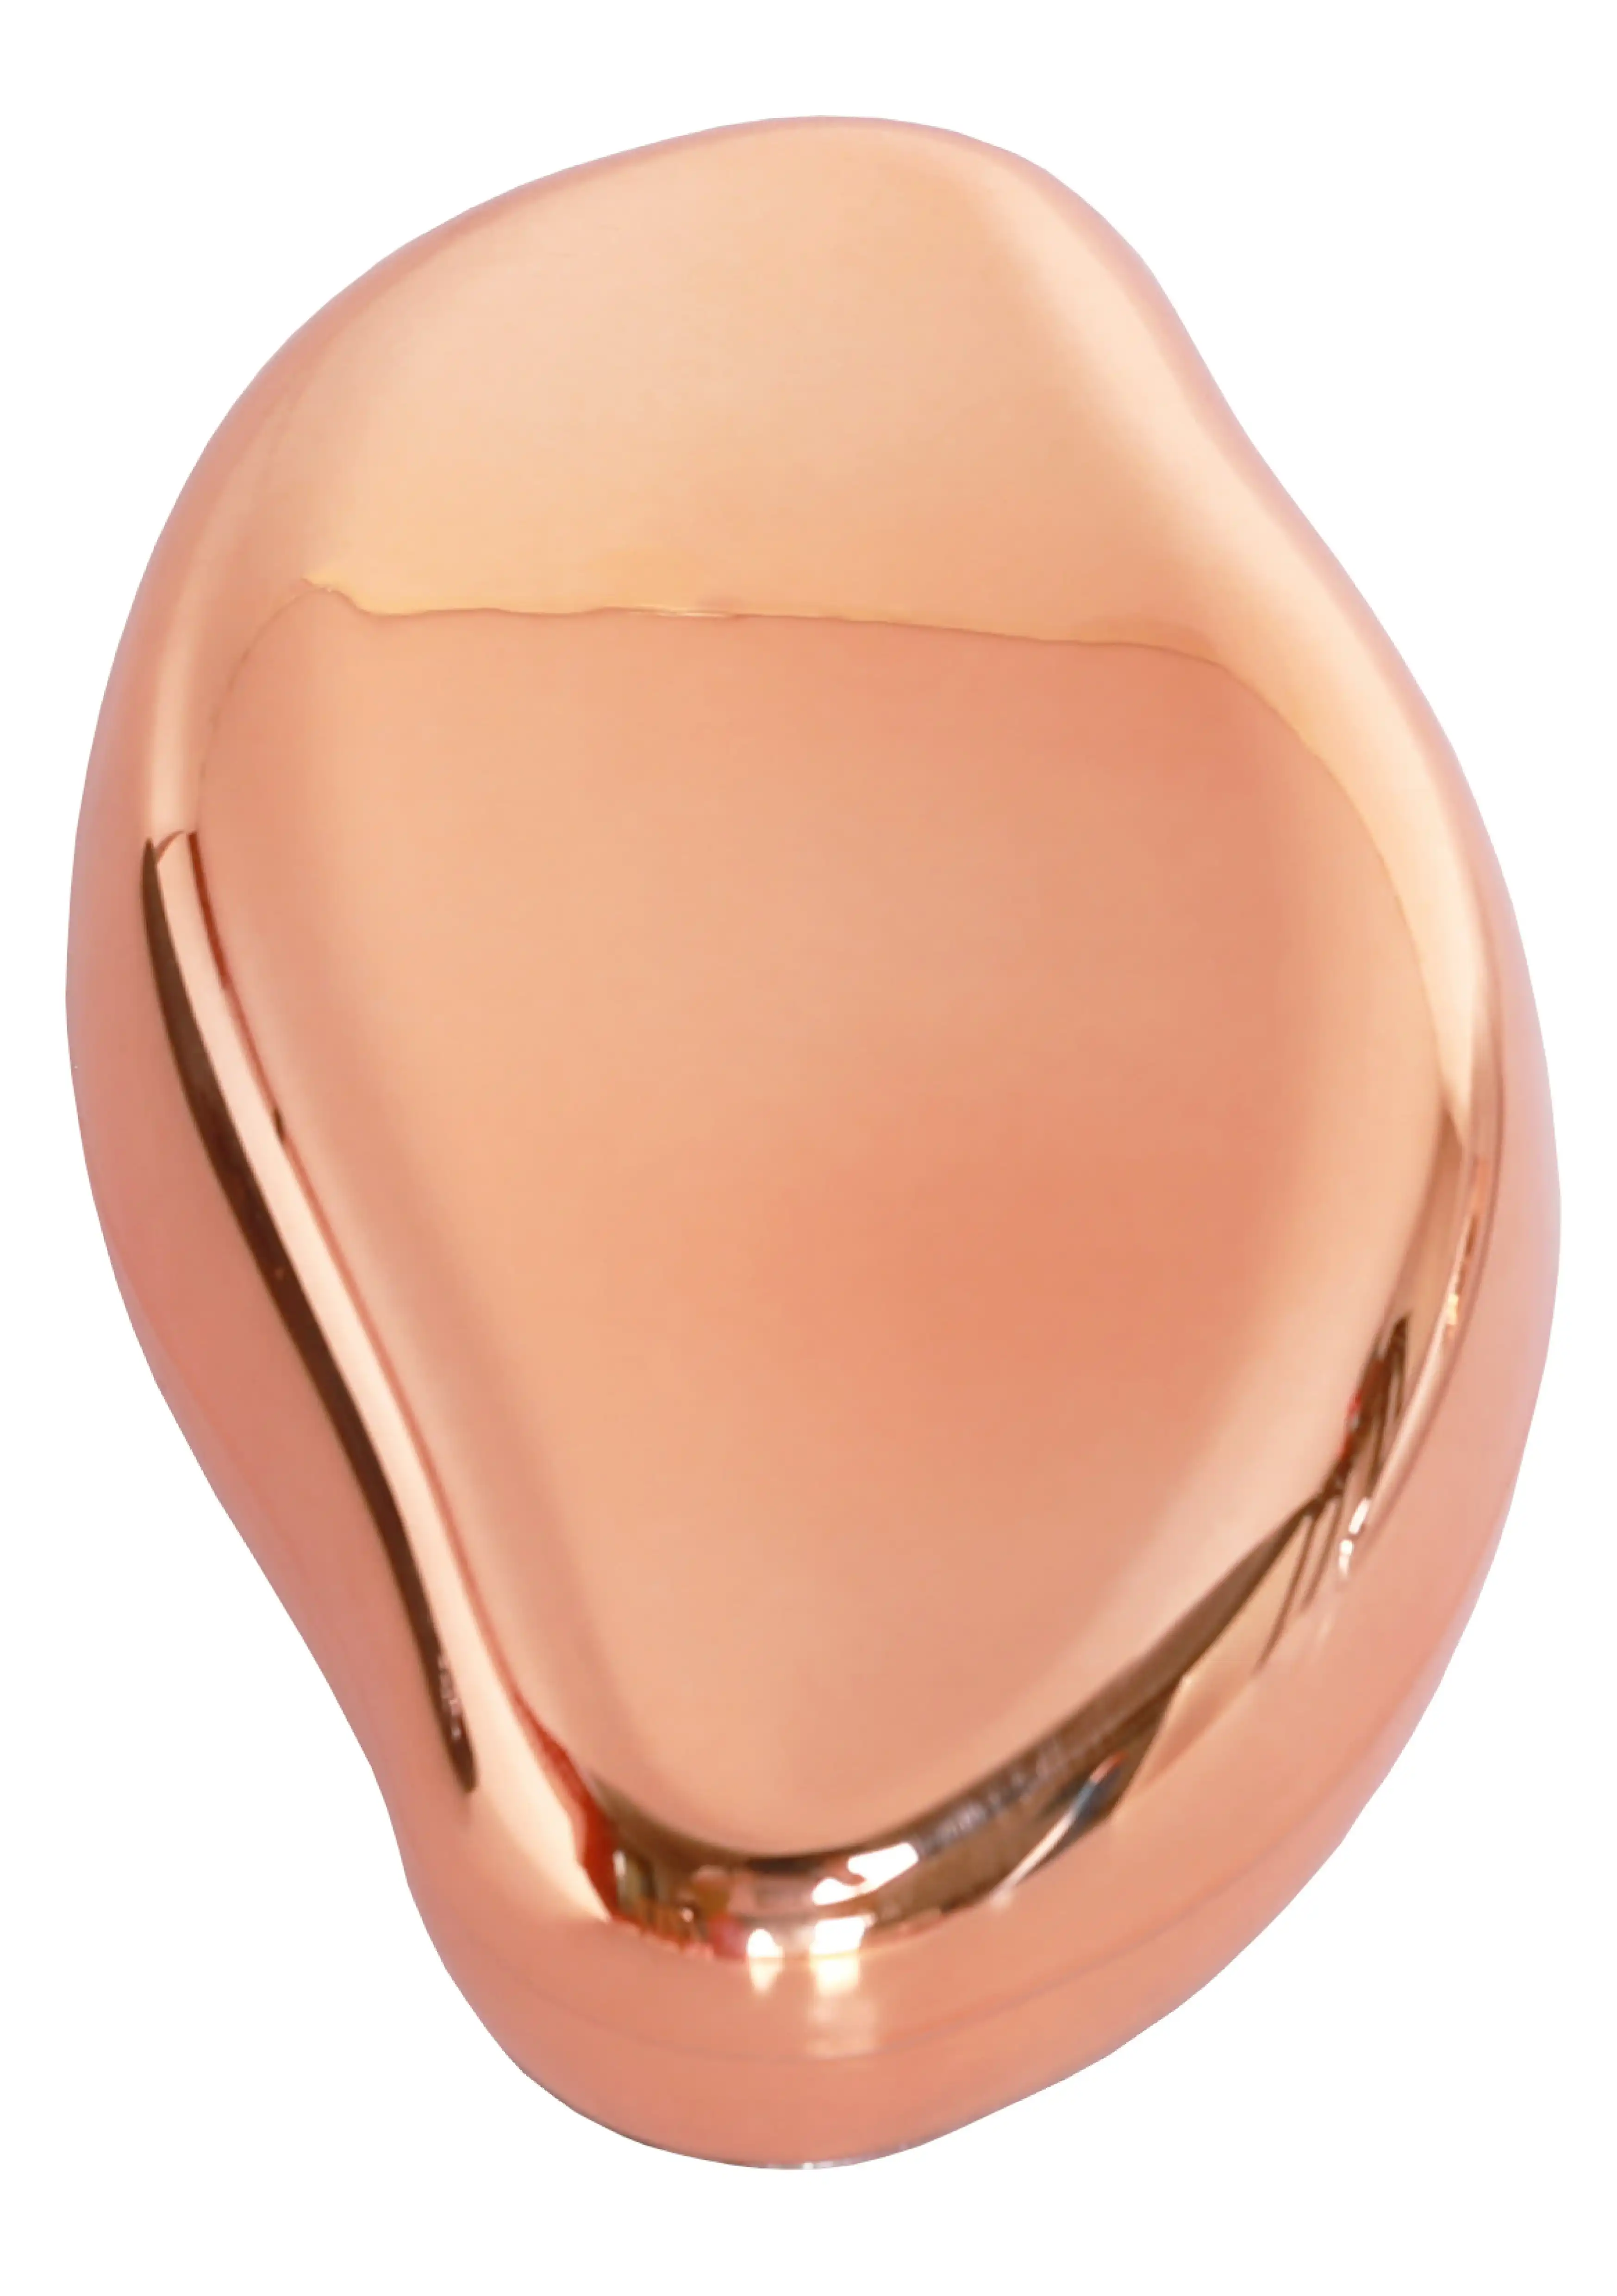 Loraine Ezy Erase Body Hair Removal Tool - Rose Gold